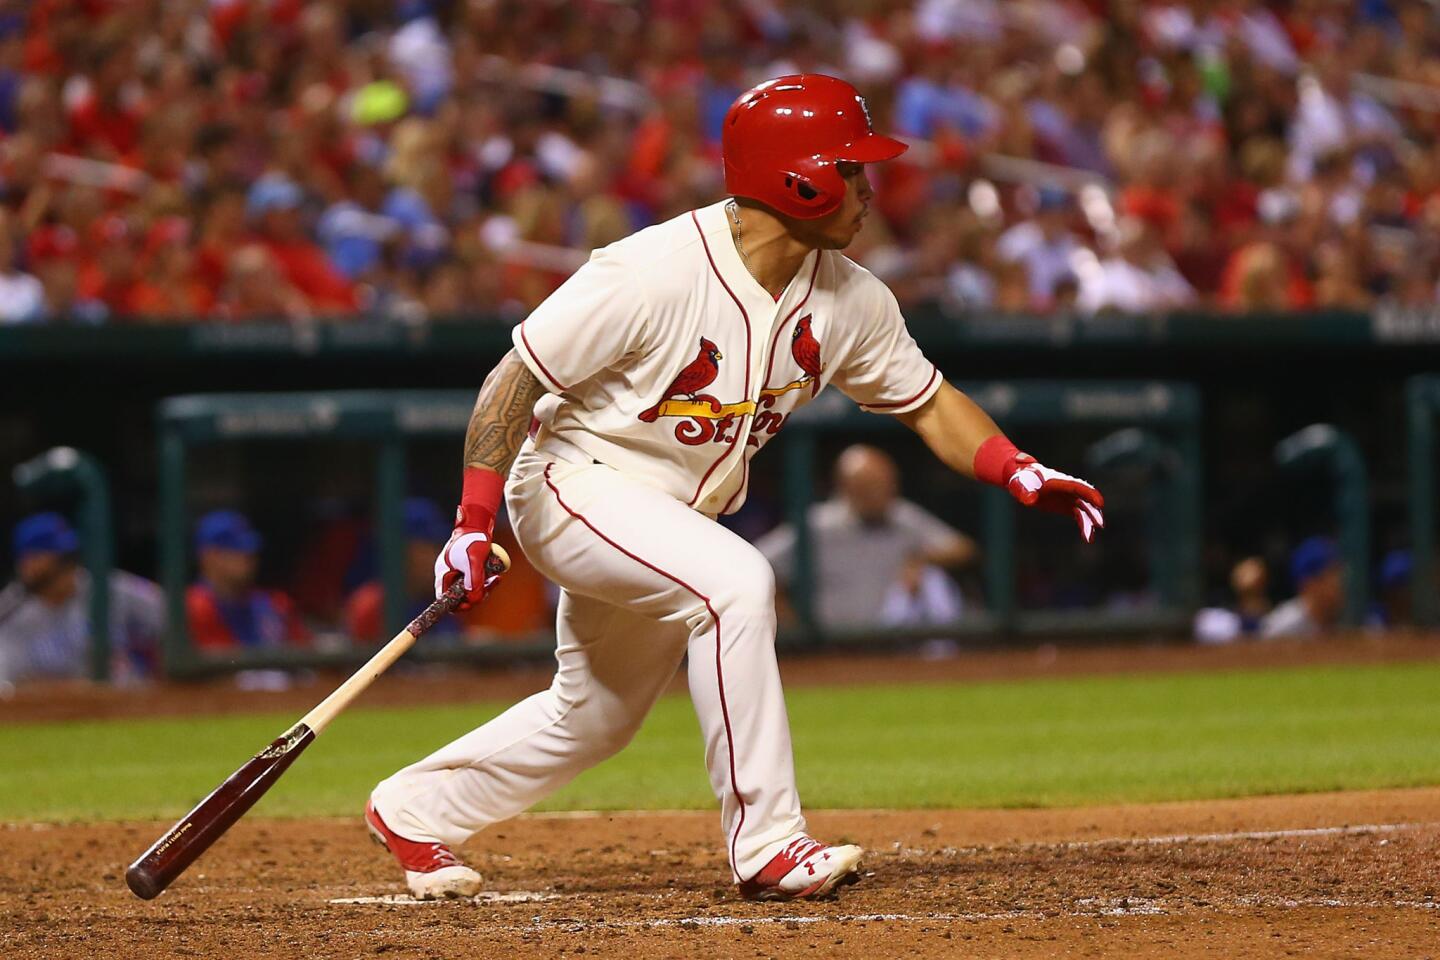 Kolten Wong hits an RBI single in the eighth inning.